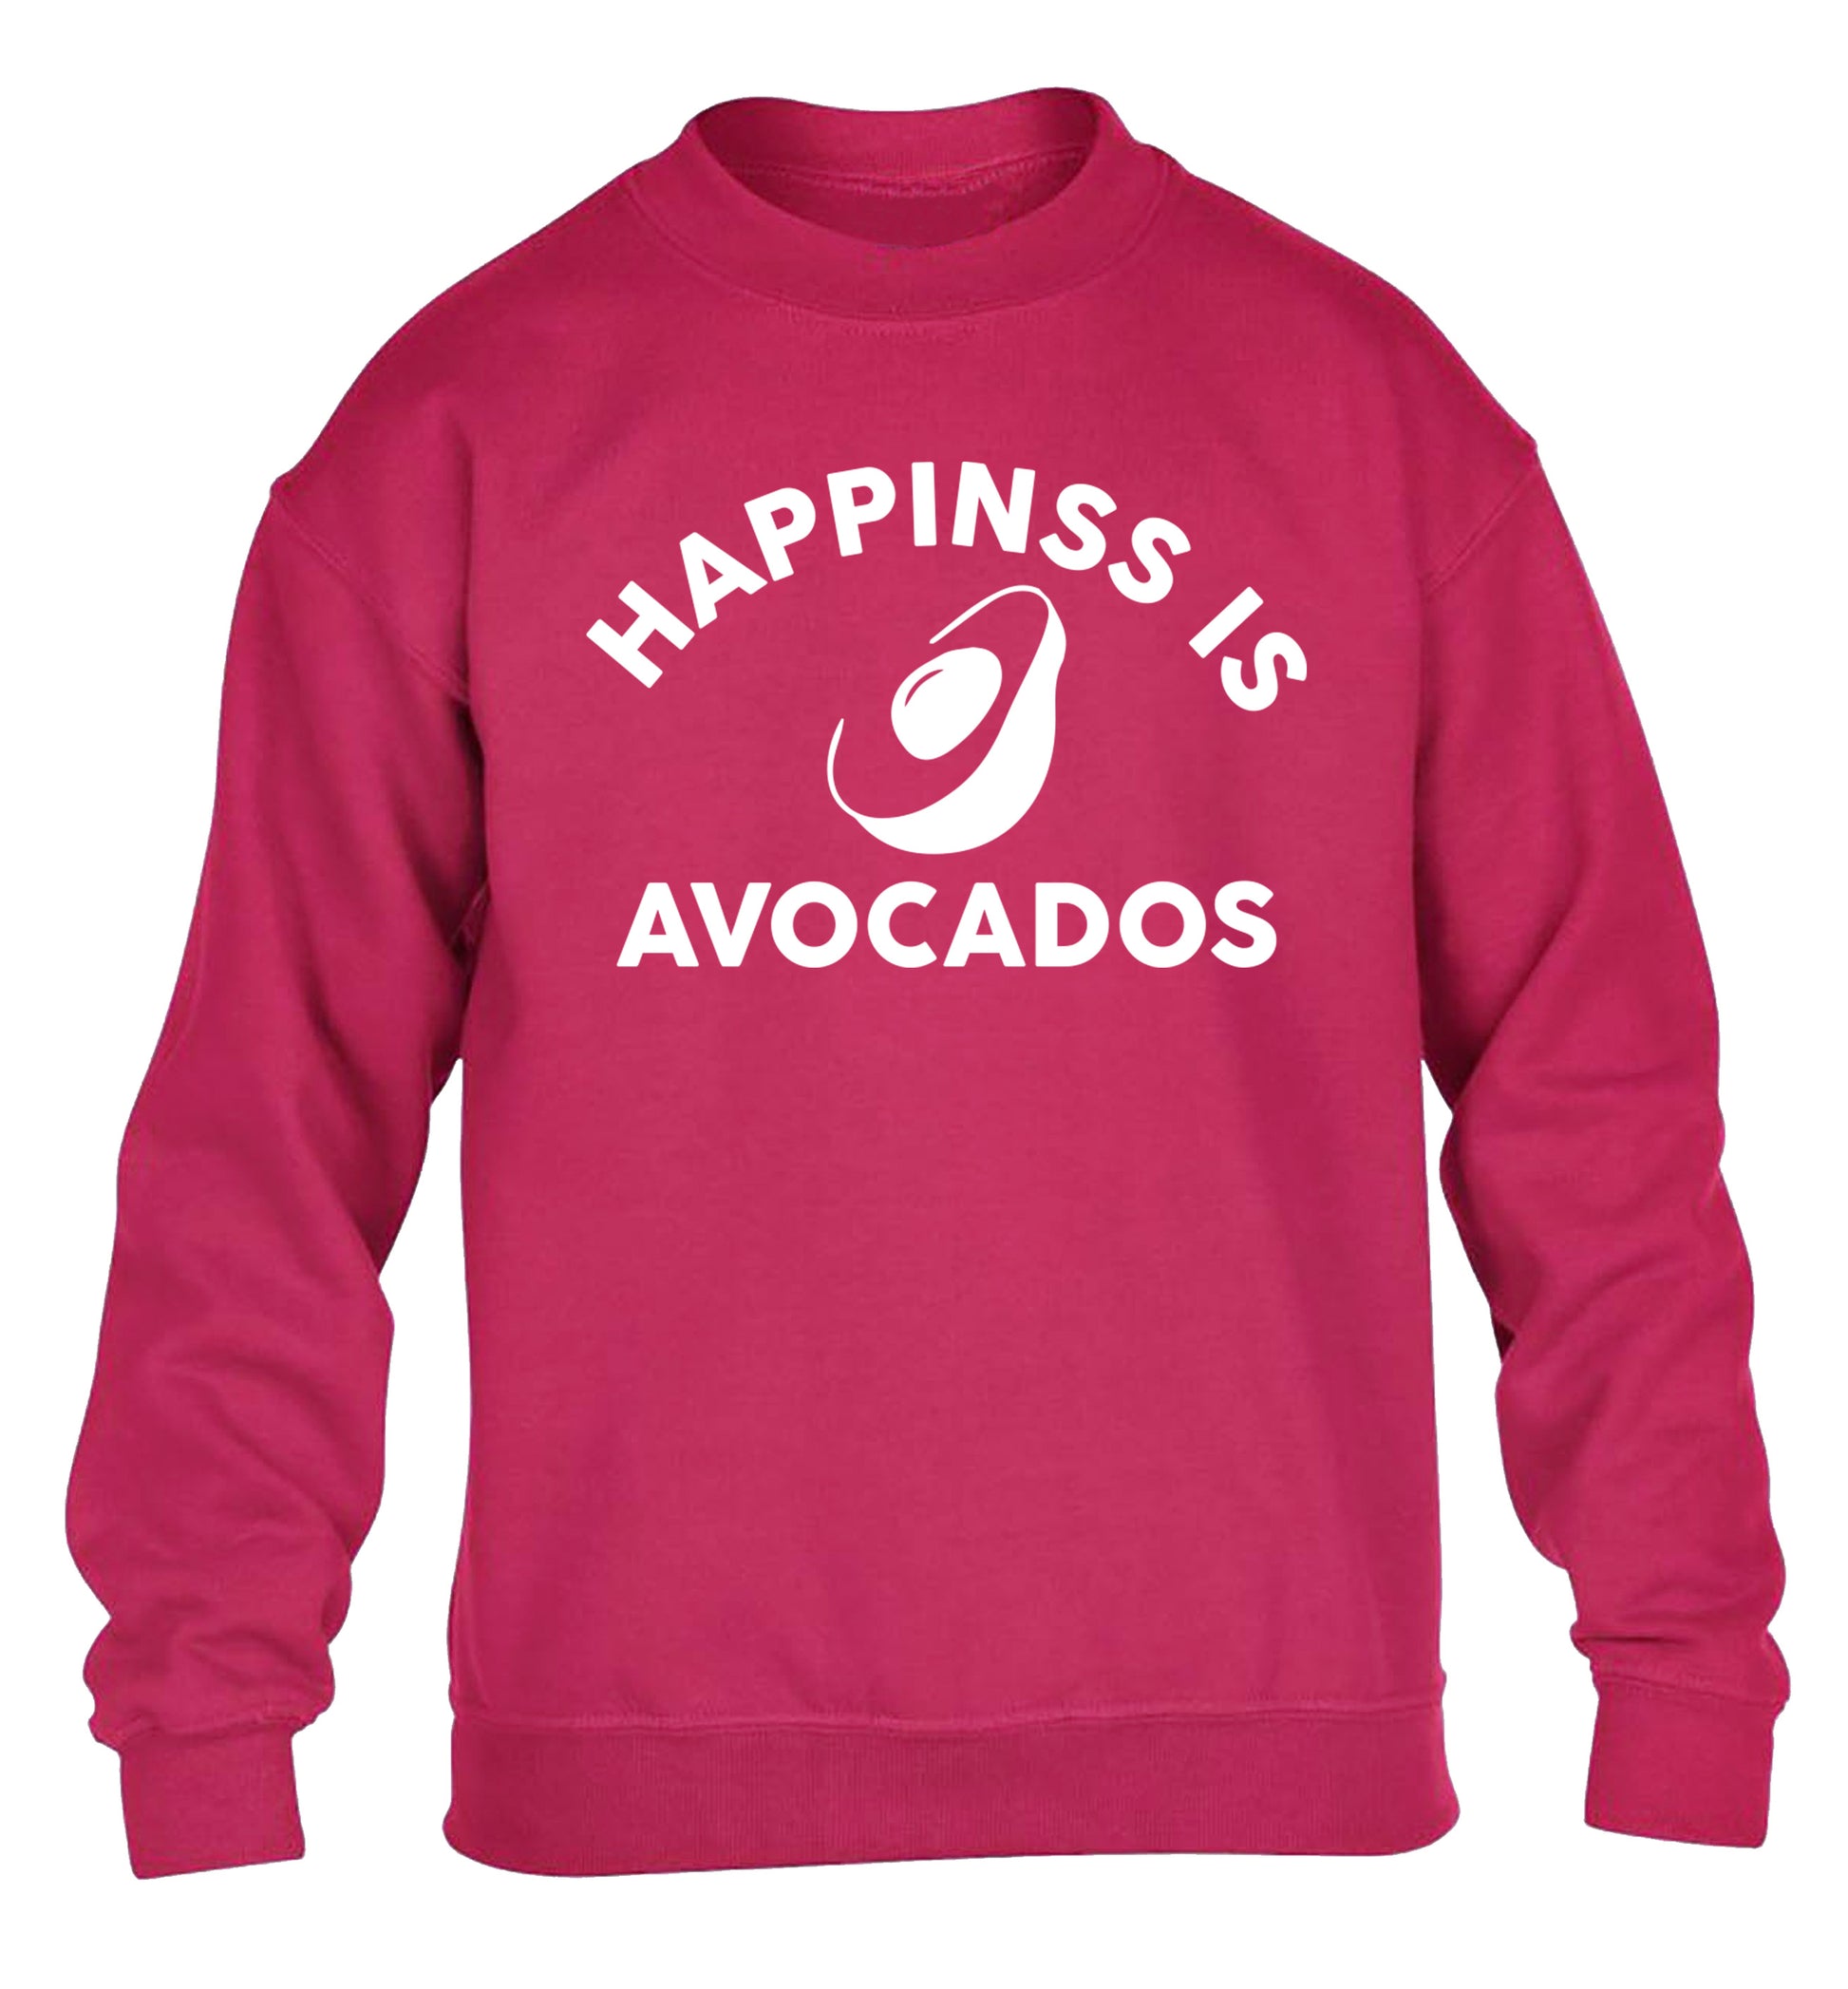 Happiness is avocados children's pink sweater 12-14 Years